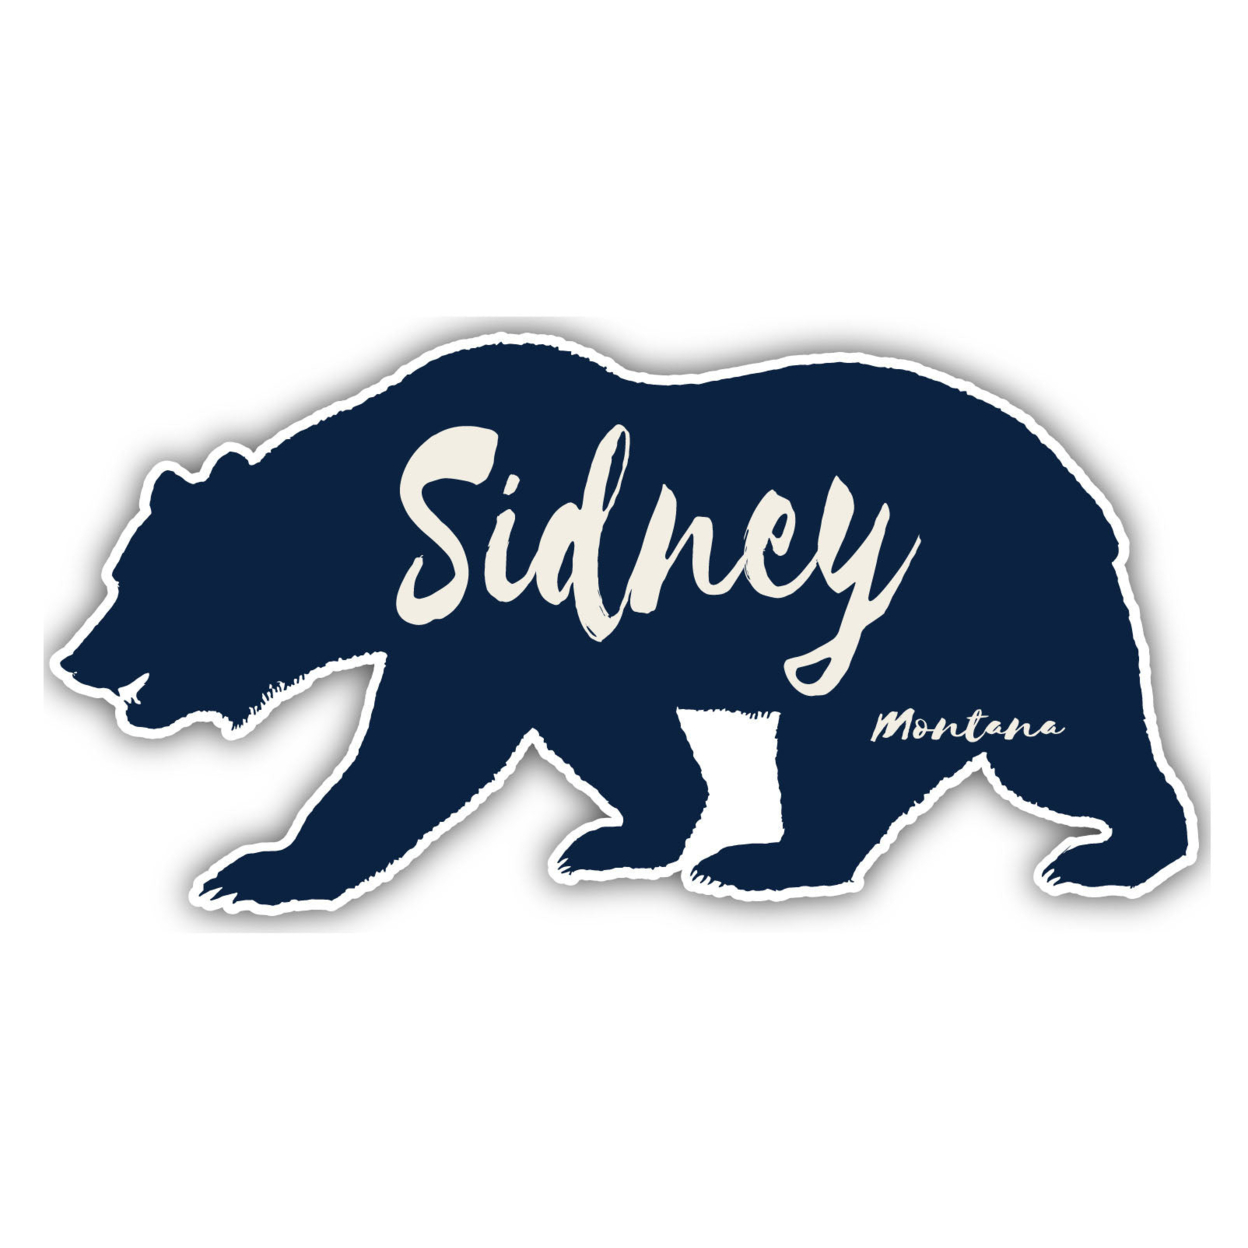 Sidney Montana Souvenir Decorative Stickers (Choose Theme And Size) - Single Unit, 4-Inch, Great Outdoors